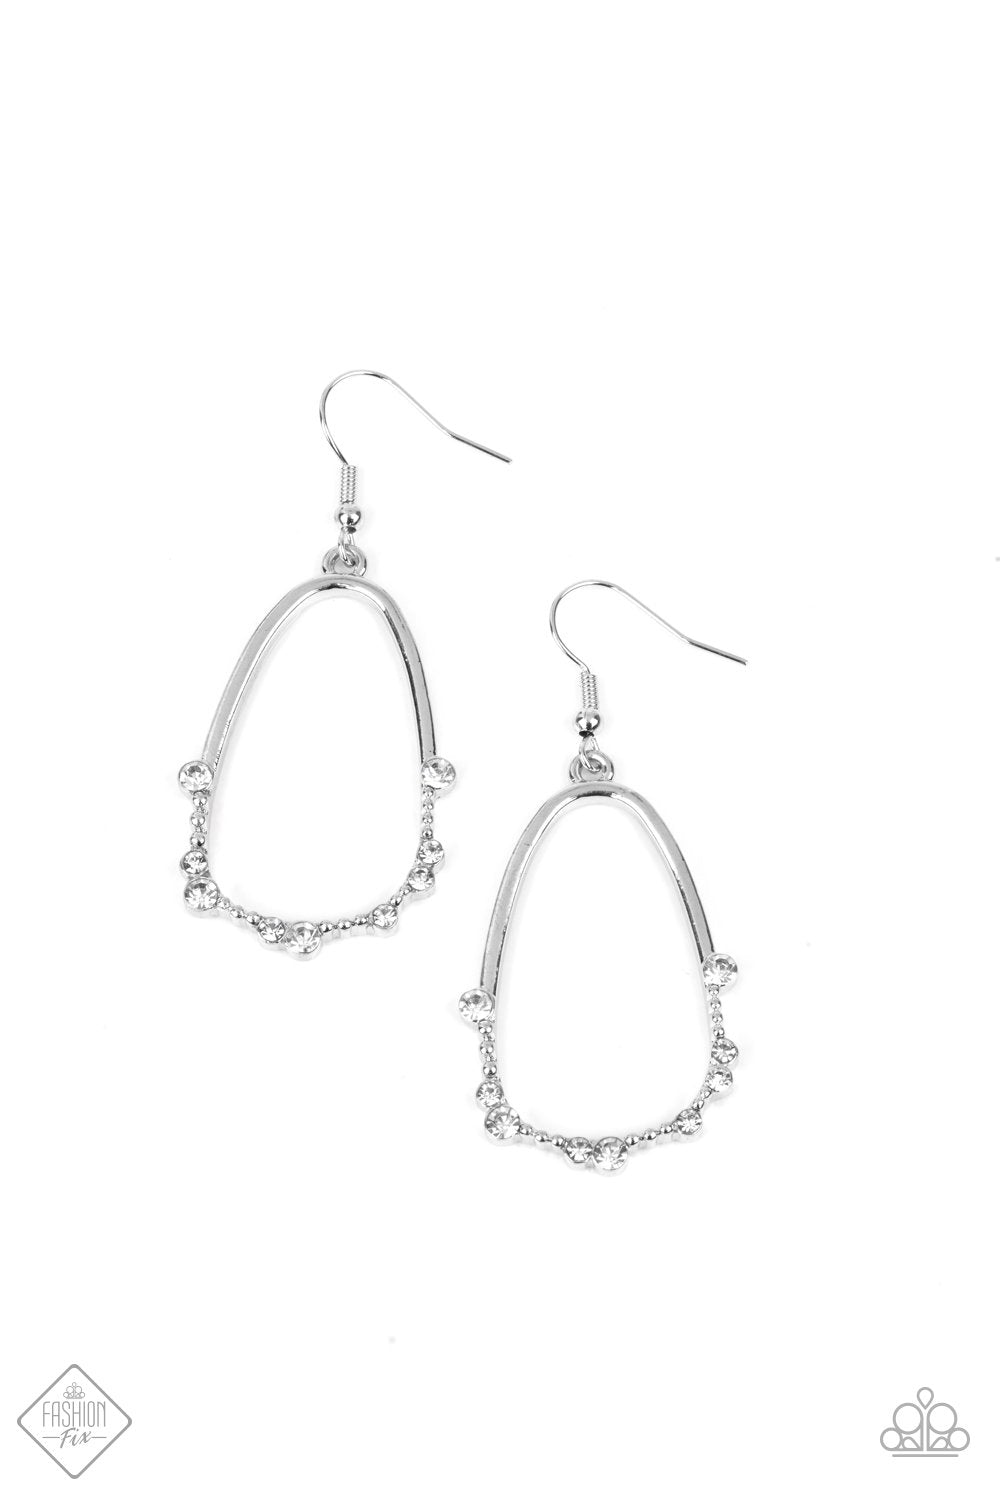 ** 0425 Paparazzi Accessories Ready or YACHT White Earrings